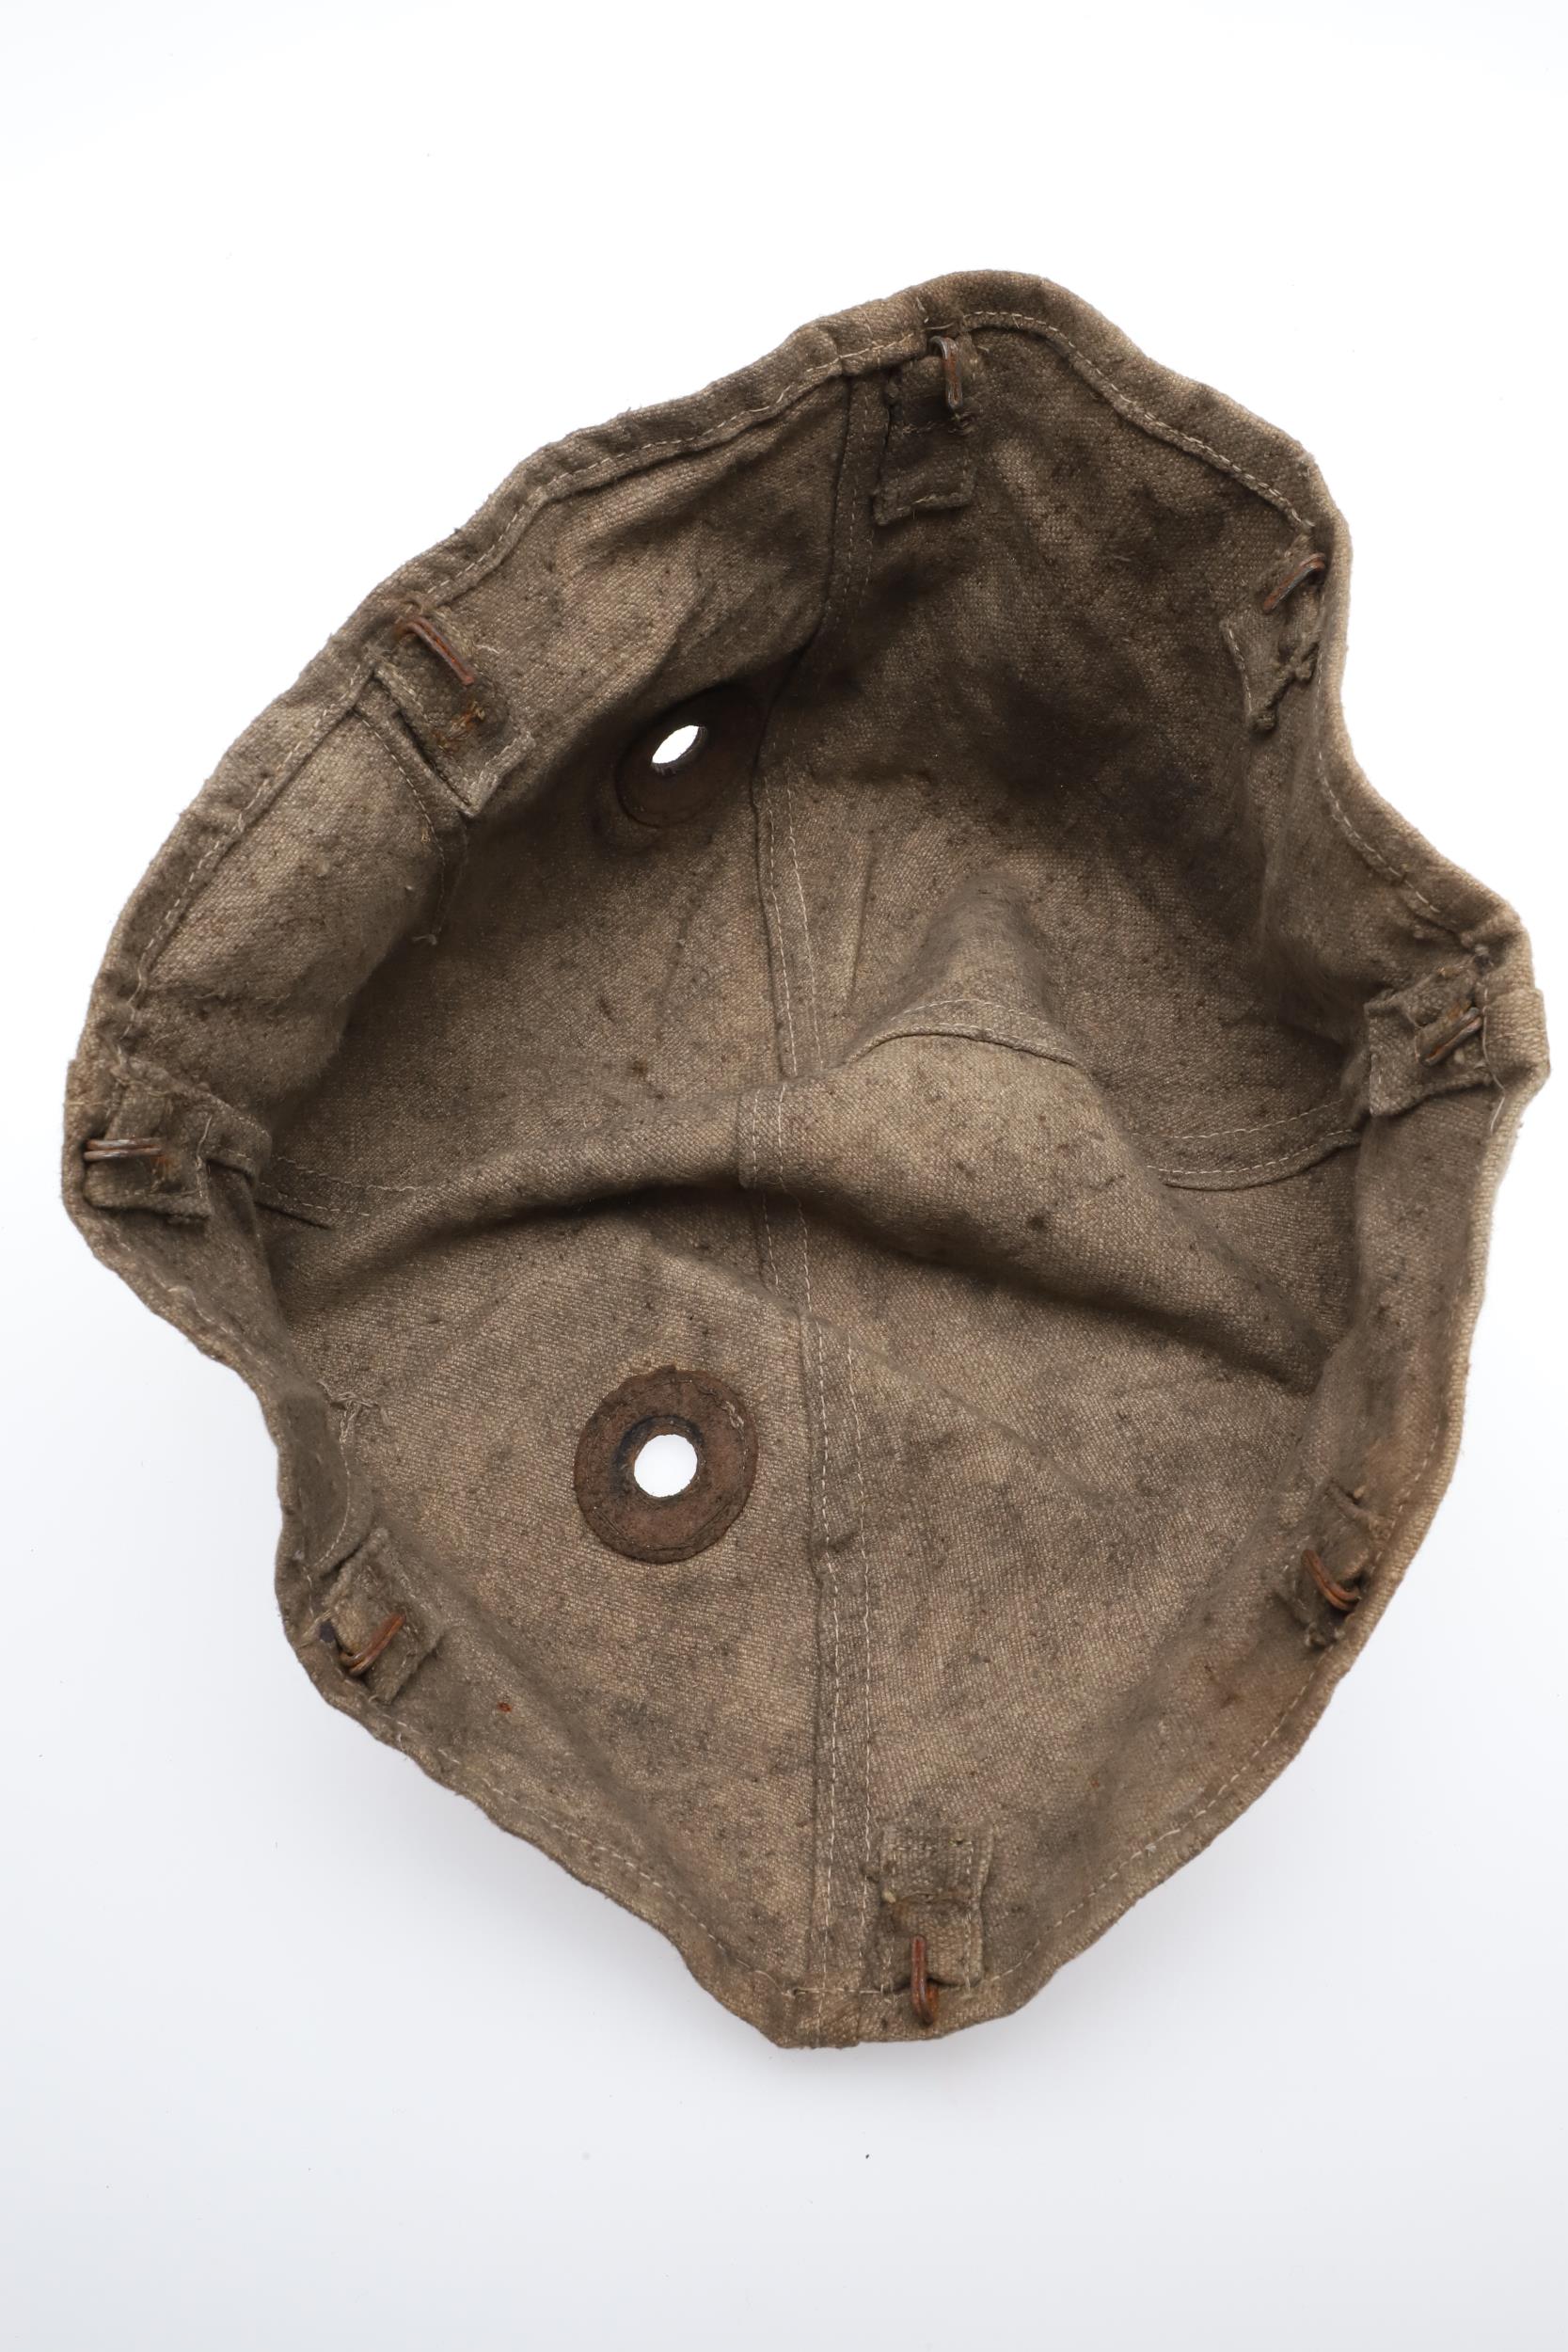 A FIRST WORLD WAR GERMAN STEEL HELMET CLOTH COVER. - Image 5 of 7